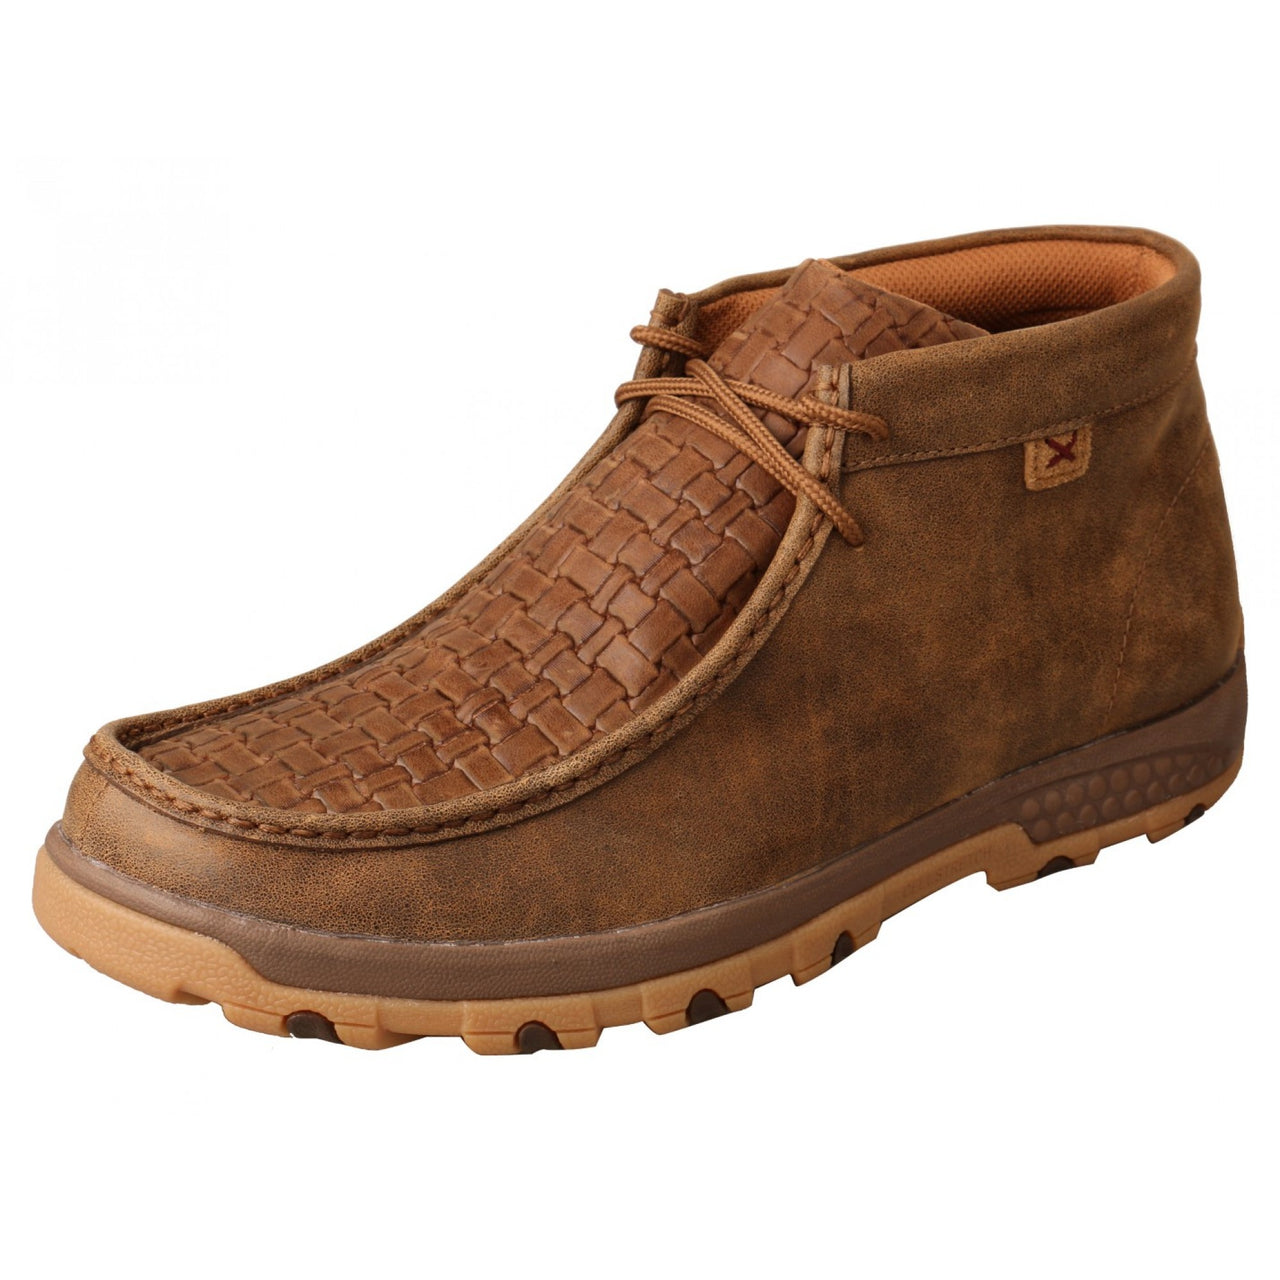 Twisted X Men's Cellstretch Chukka Driving Mocs - Bomber/Chocolate